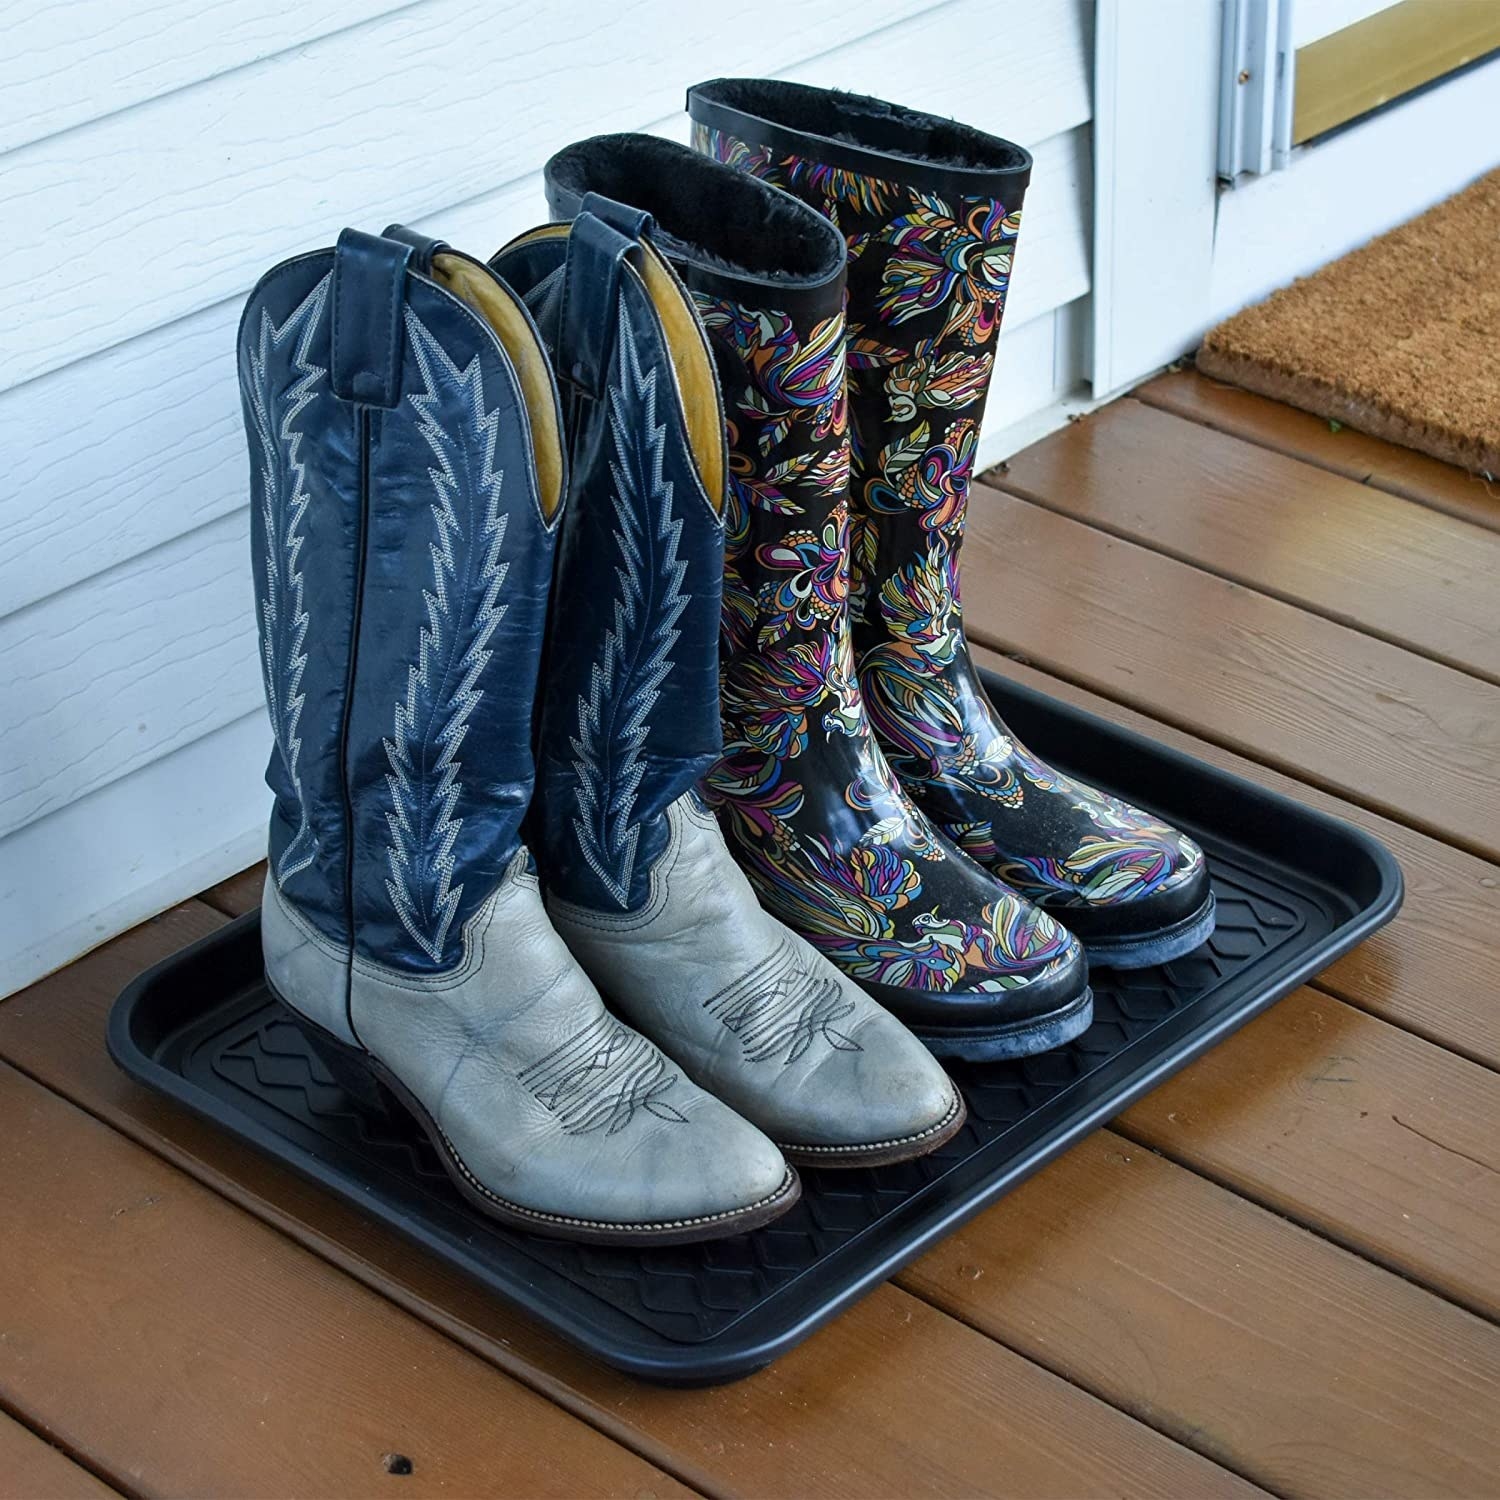 Two pairs of boots on the tray